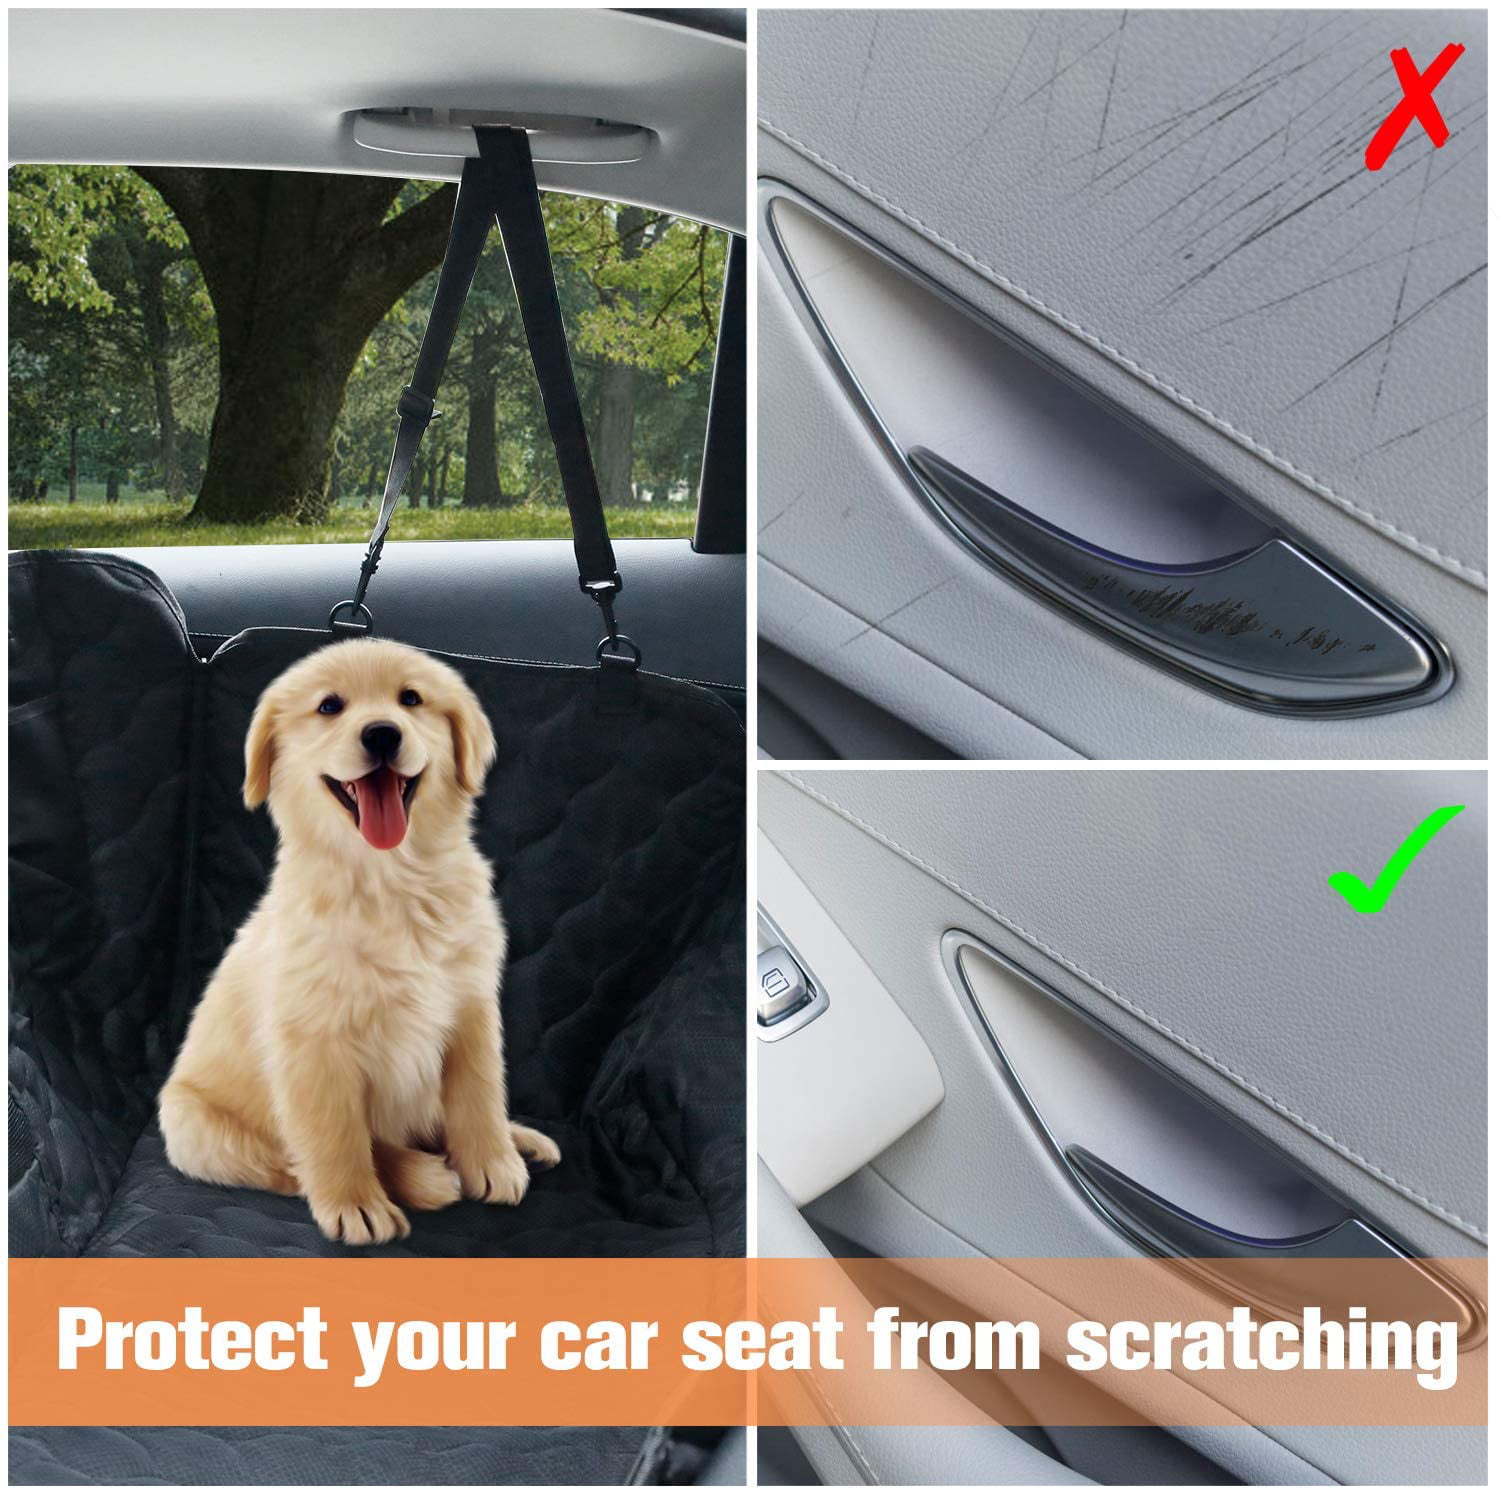 VNASKL Dog Seat Cover Custom Icon Warning Sign Wildlife Particular Printing Car Seat Covers for Dogs 100% Waterproof Nonslip Durable Soft Pet Car Seat Dog Car Hammock for Cars Trucks SUV 